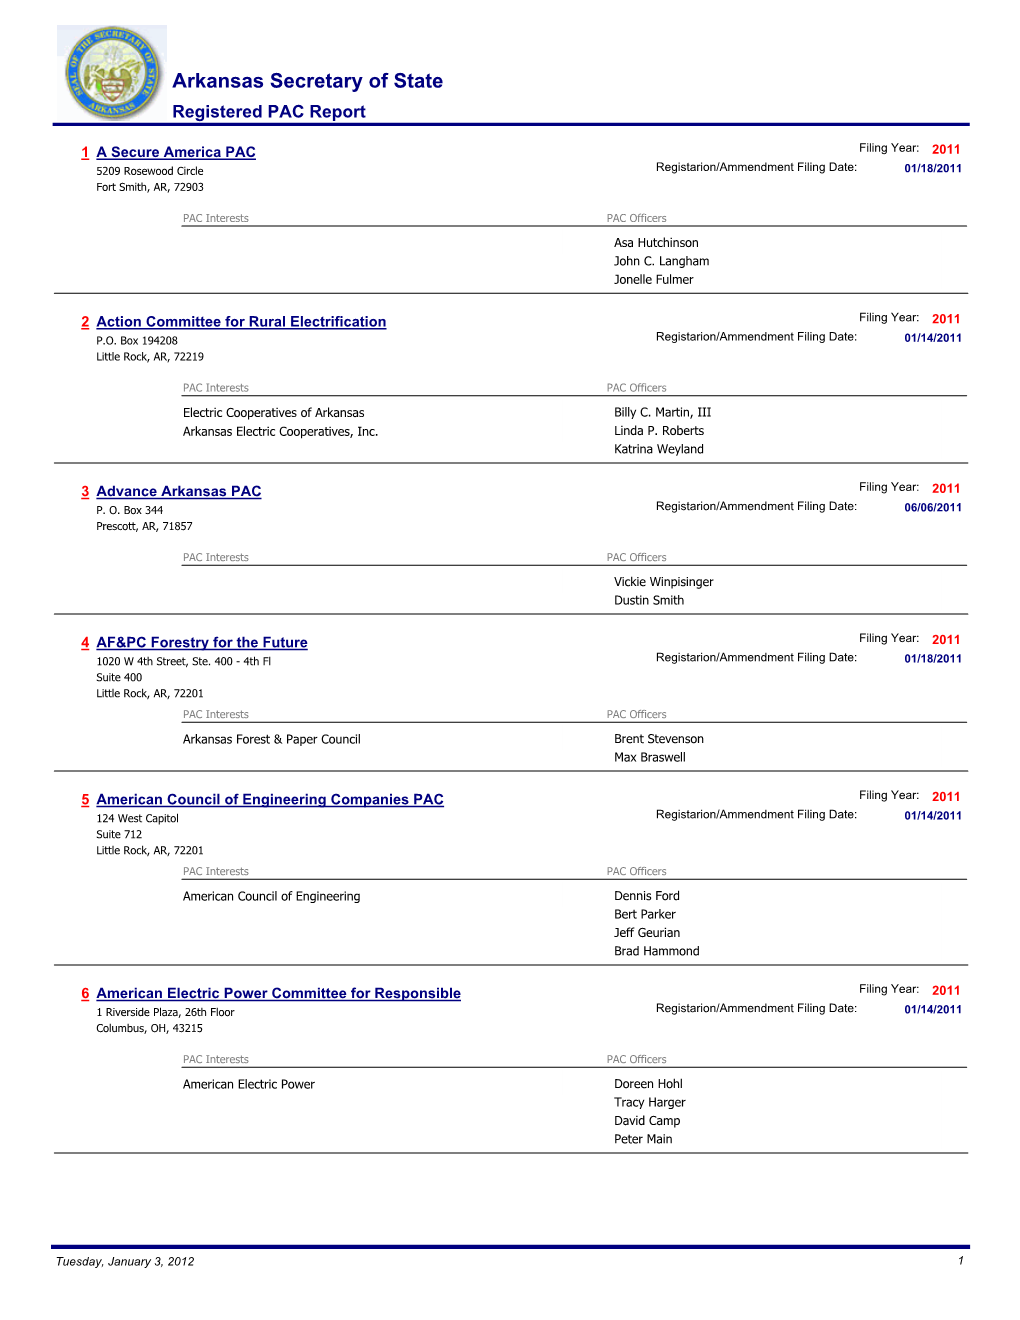 2011 Registered Political Action Committees